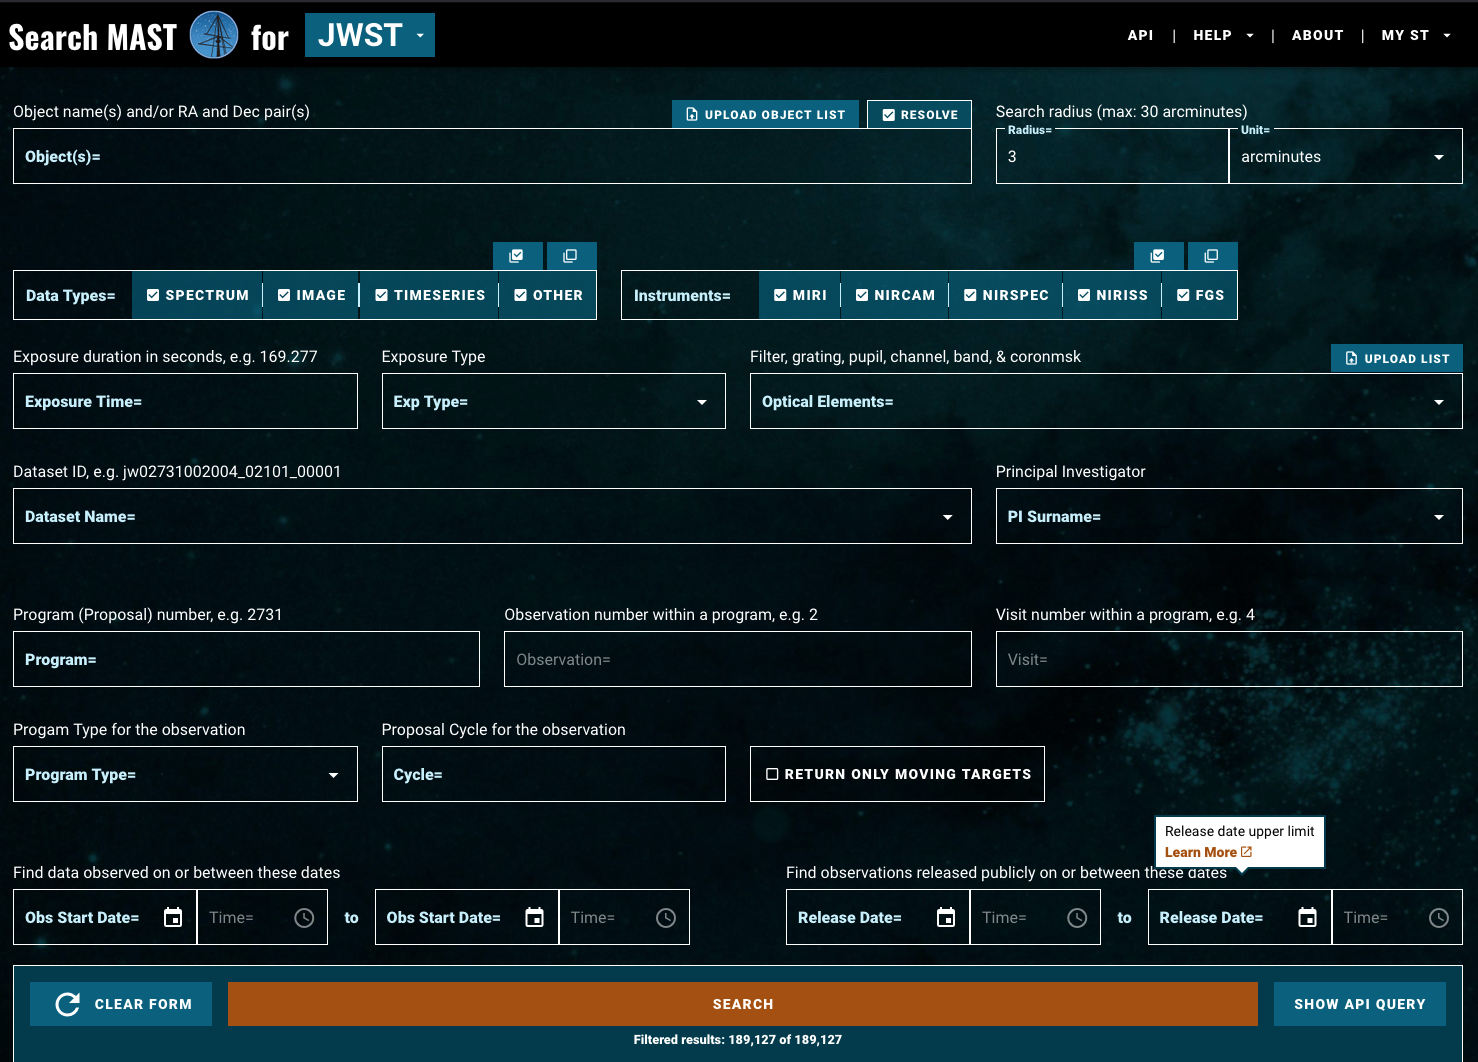 JWST Mission Search user interface